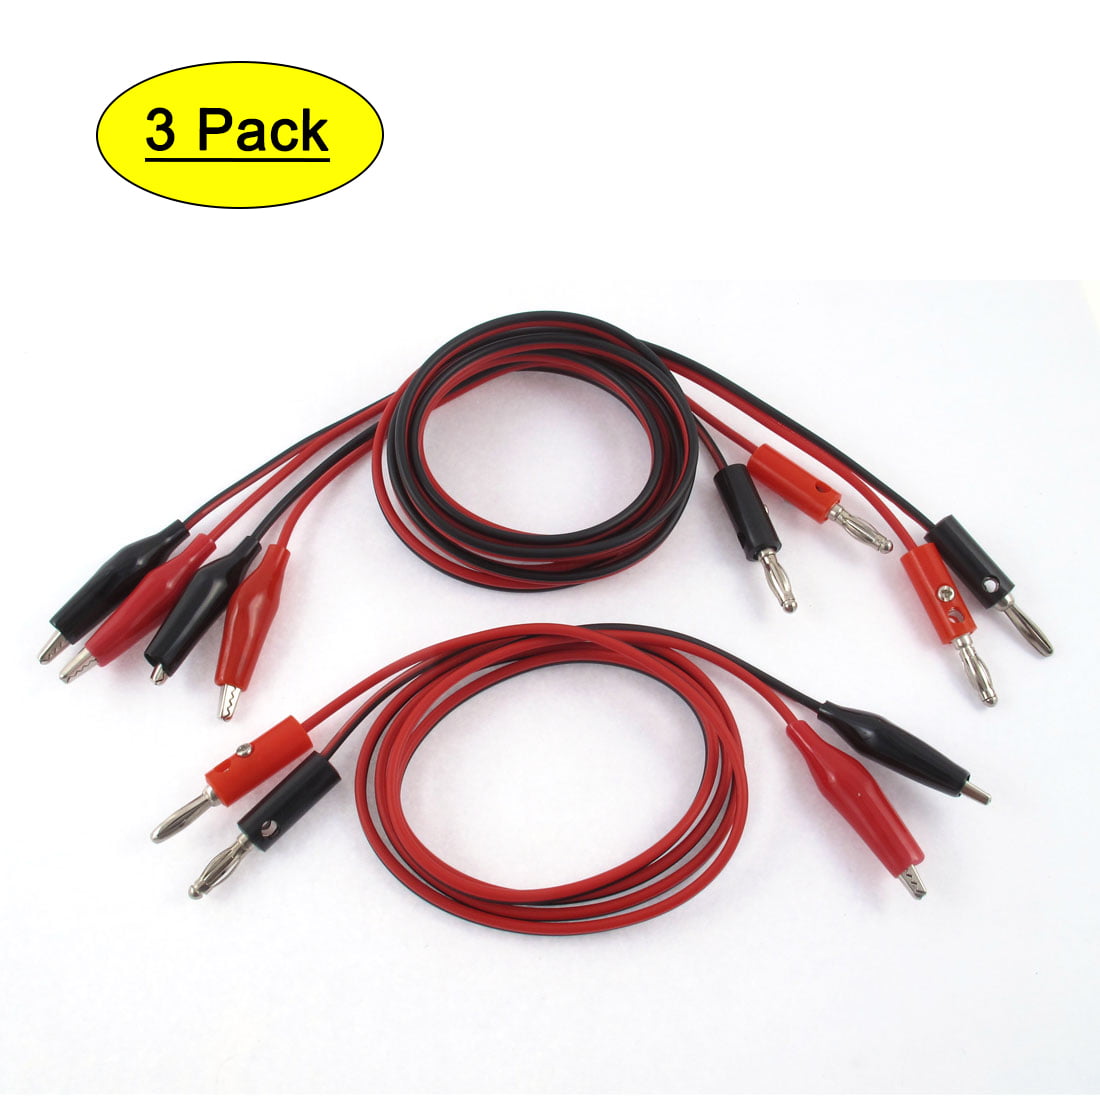 Test Cable Banana plug Male to Alligator Clip 0.8M Red/Black High-quality 1 set 